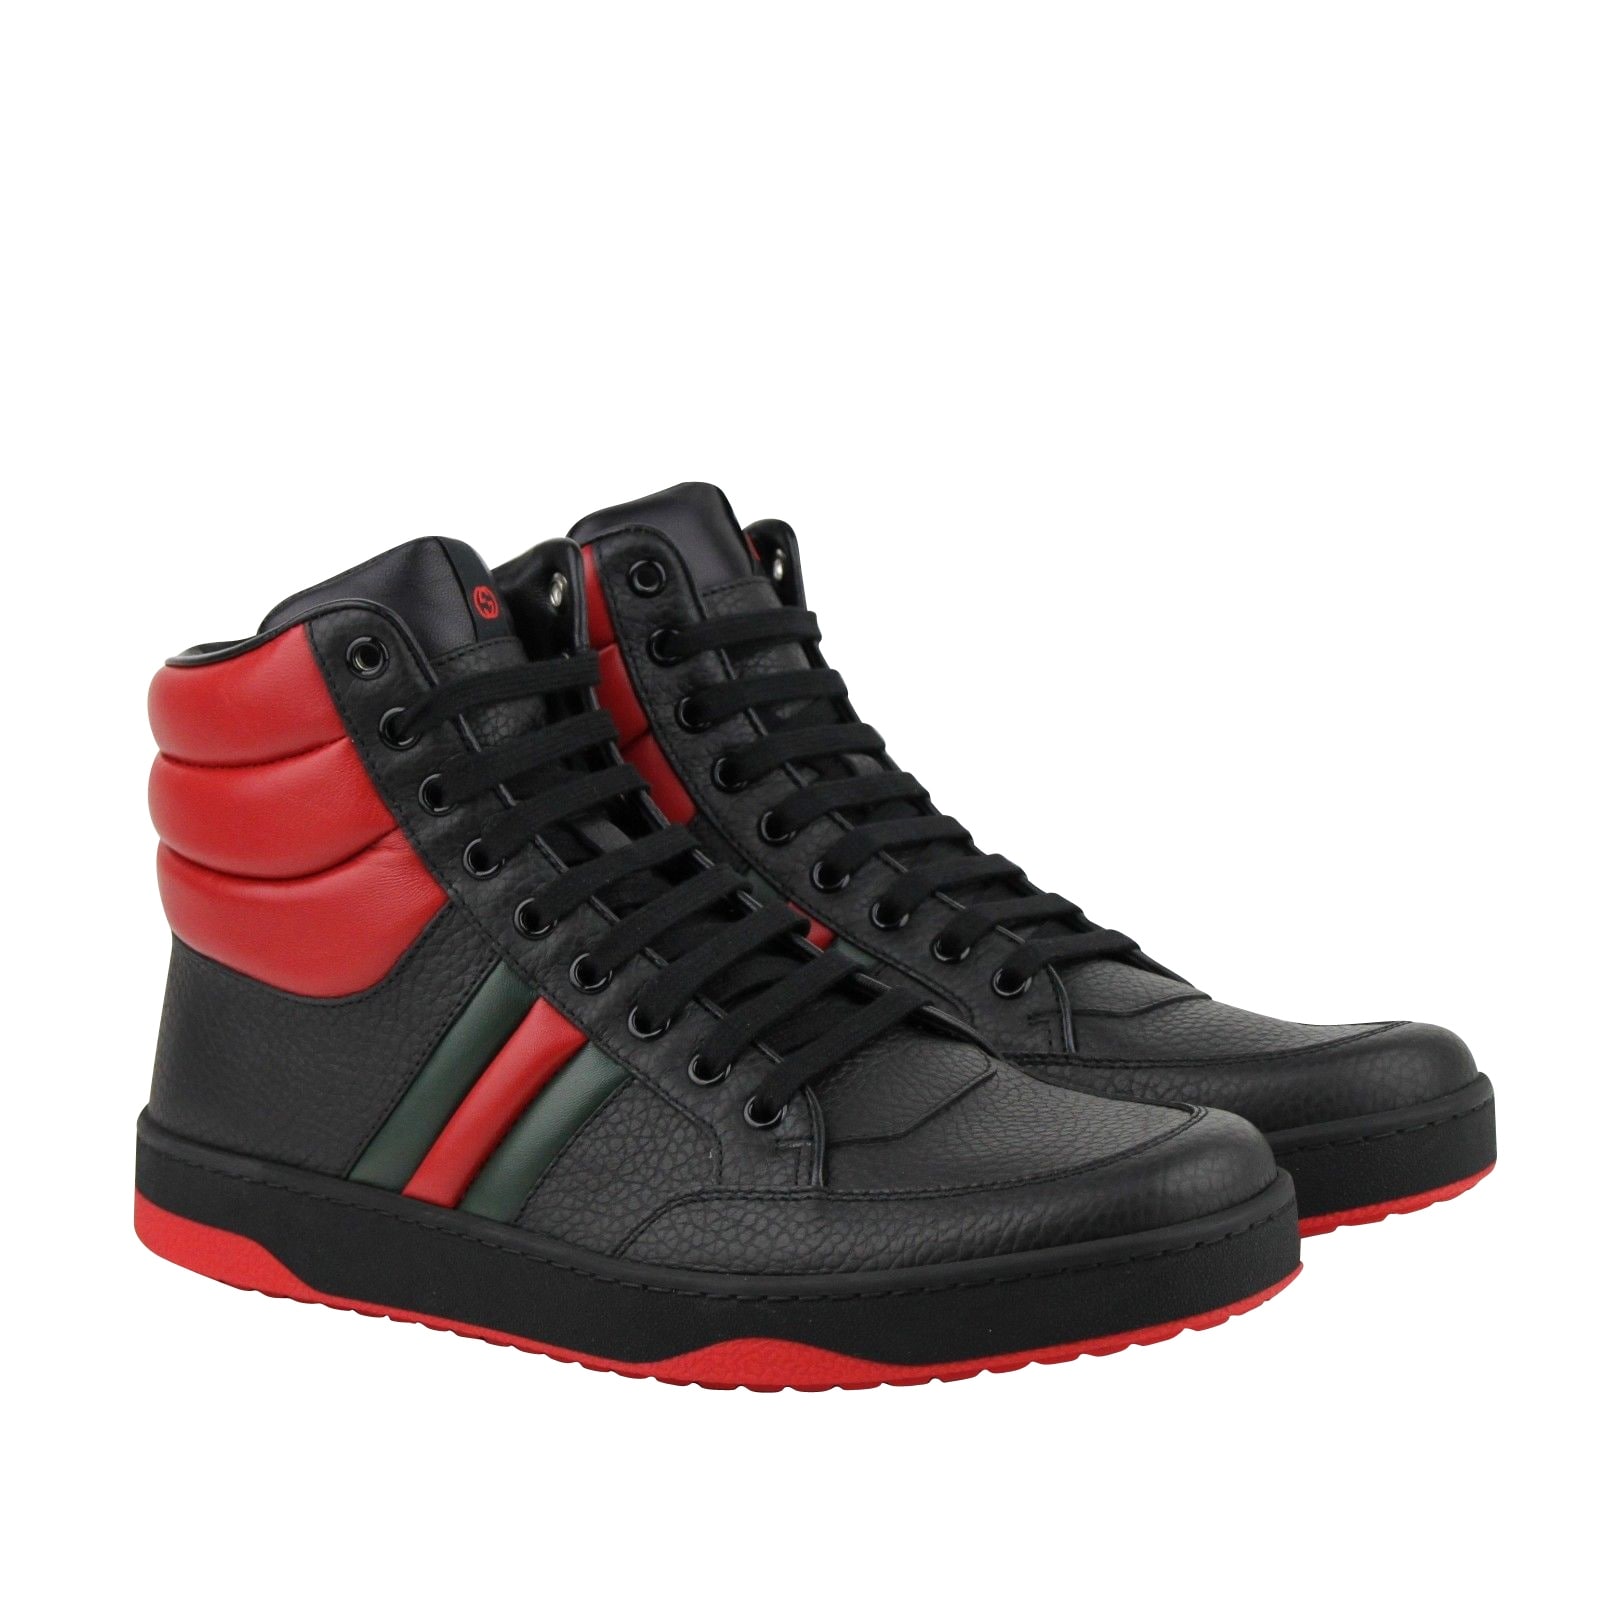 black and red high top sneakers